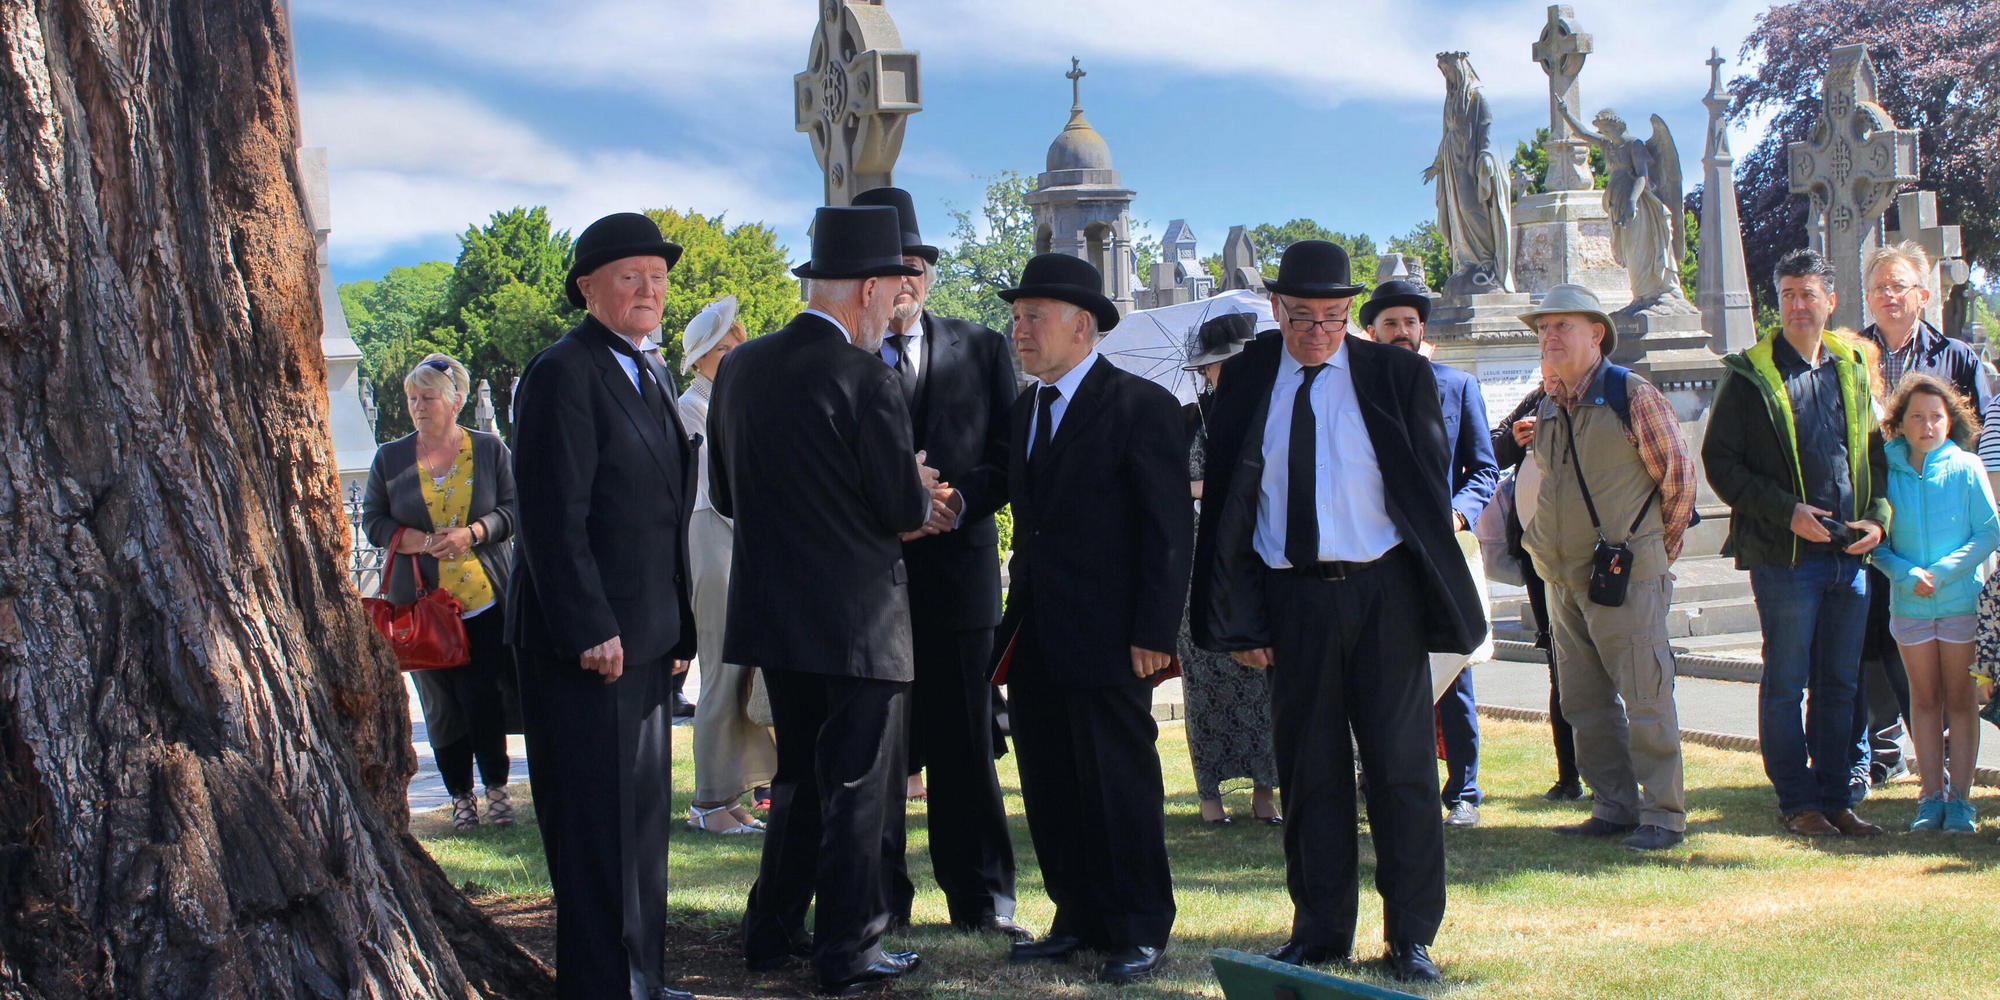 Bloomsday. The annual re-enactment of the funeral procession of Paddy Dignam from chapter 6 Ulysses, Hades, staged by the Joycestagers.in Glasnevin.